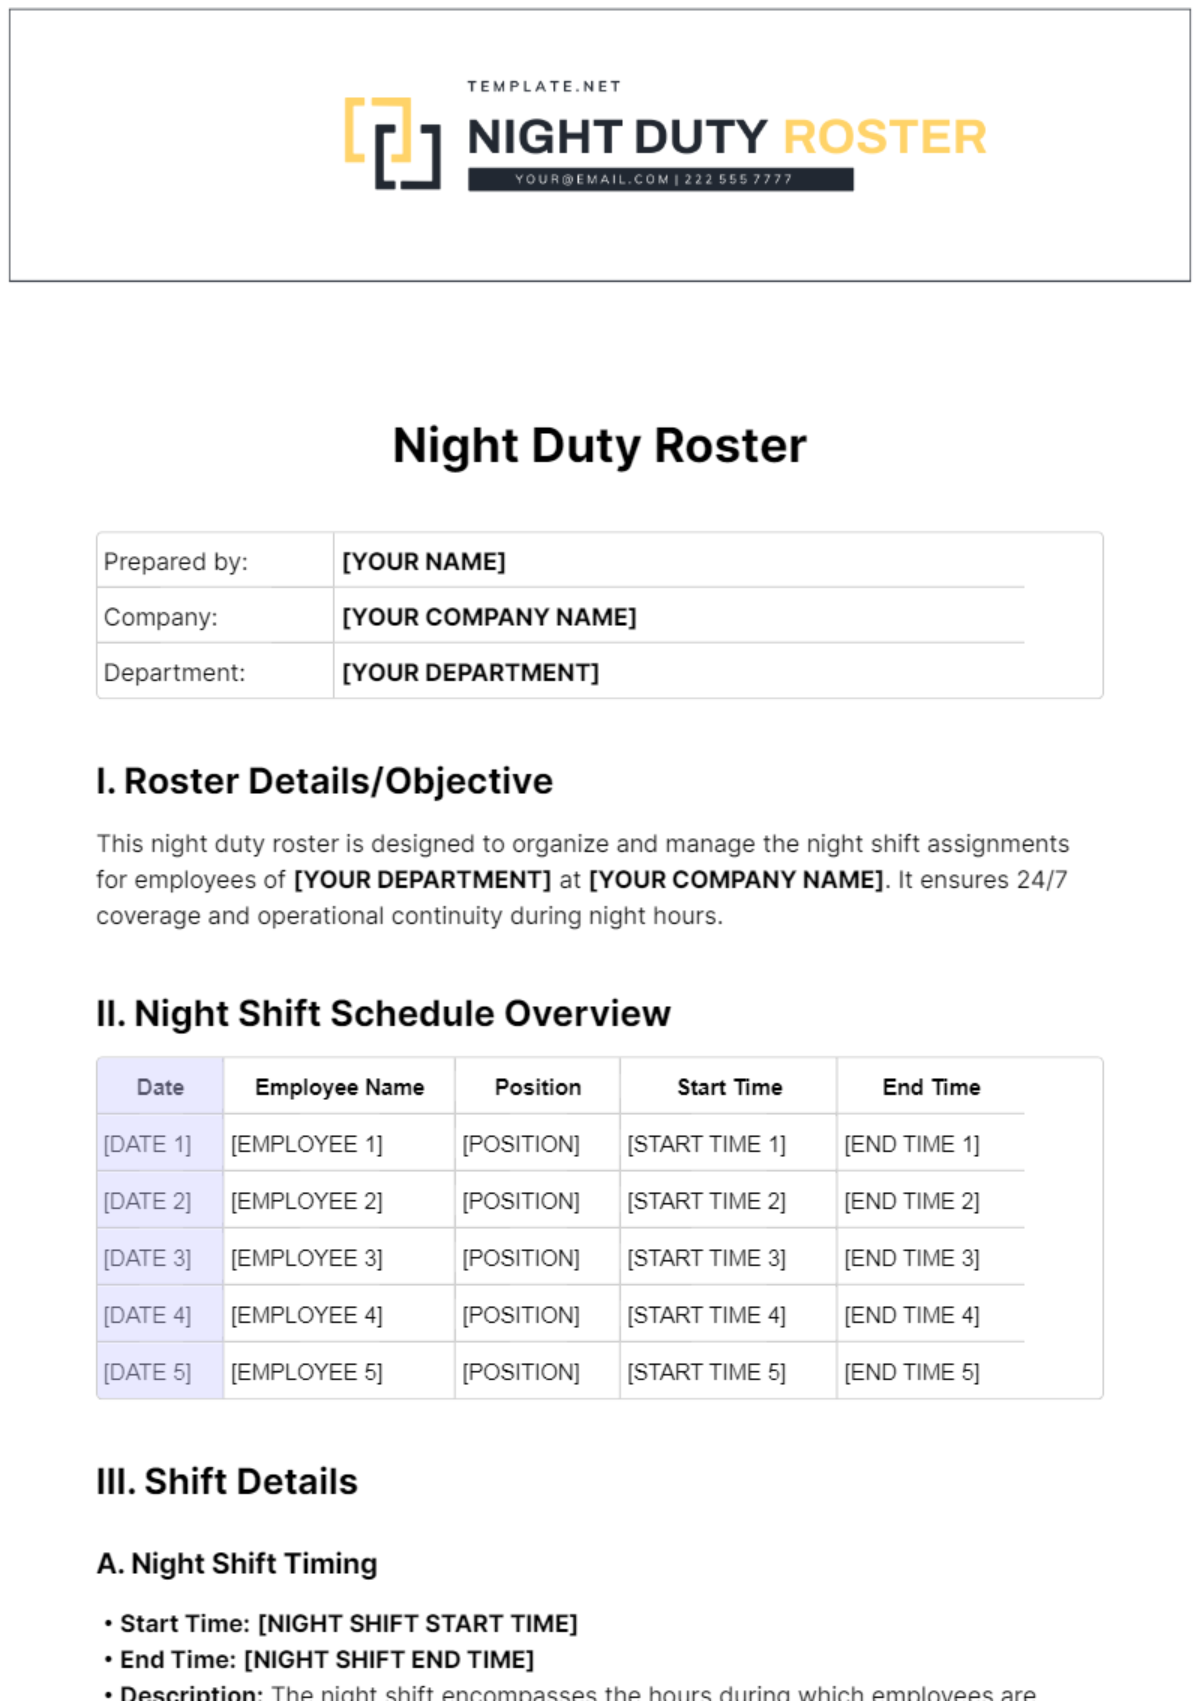 Night Duty Roster Template